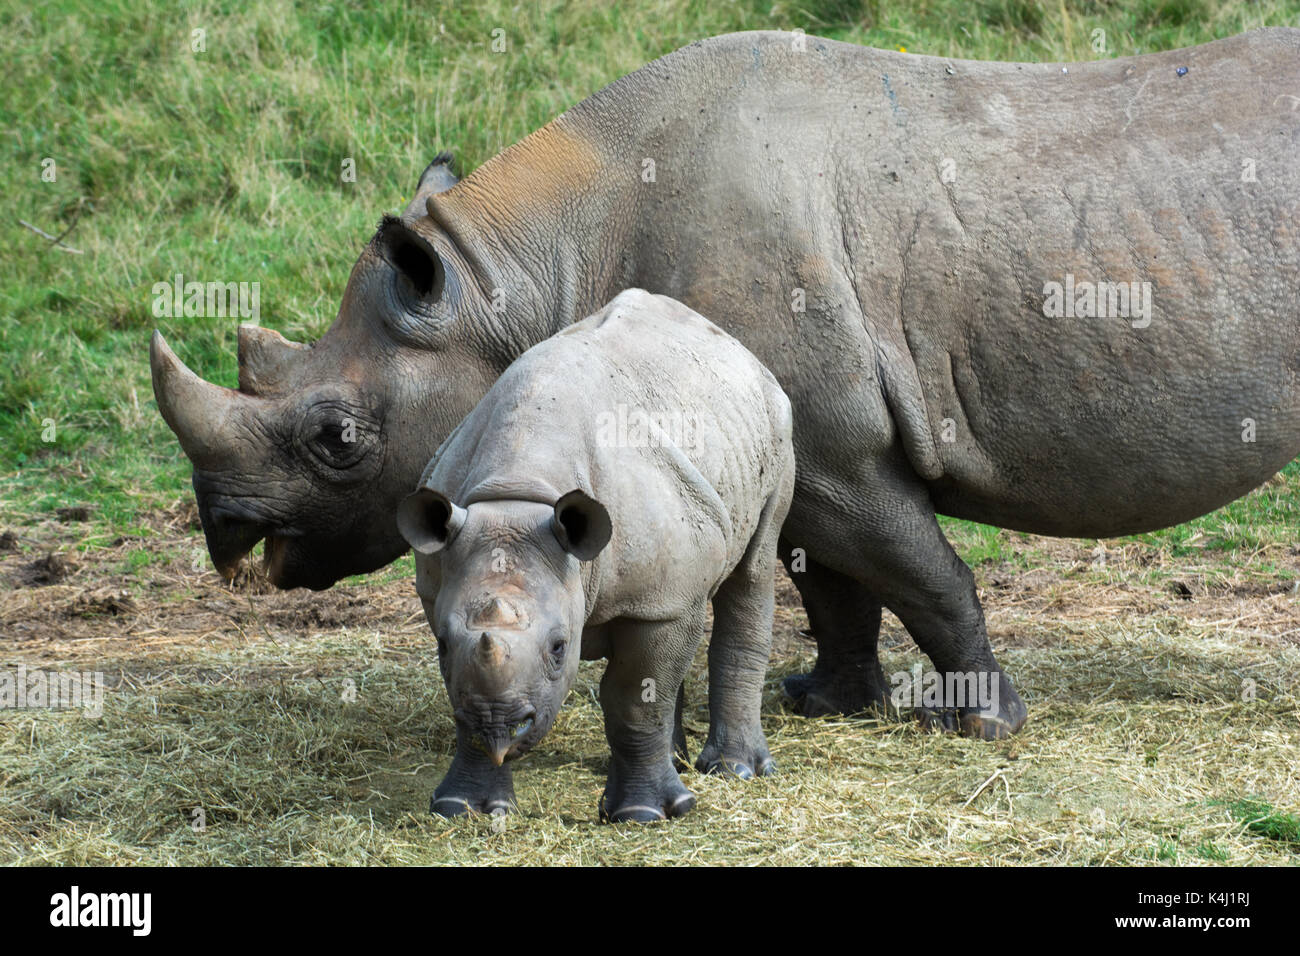 Baby rhino with mother grazing outside Stock Photo